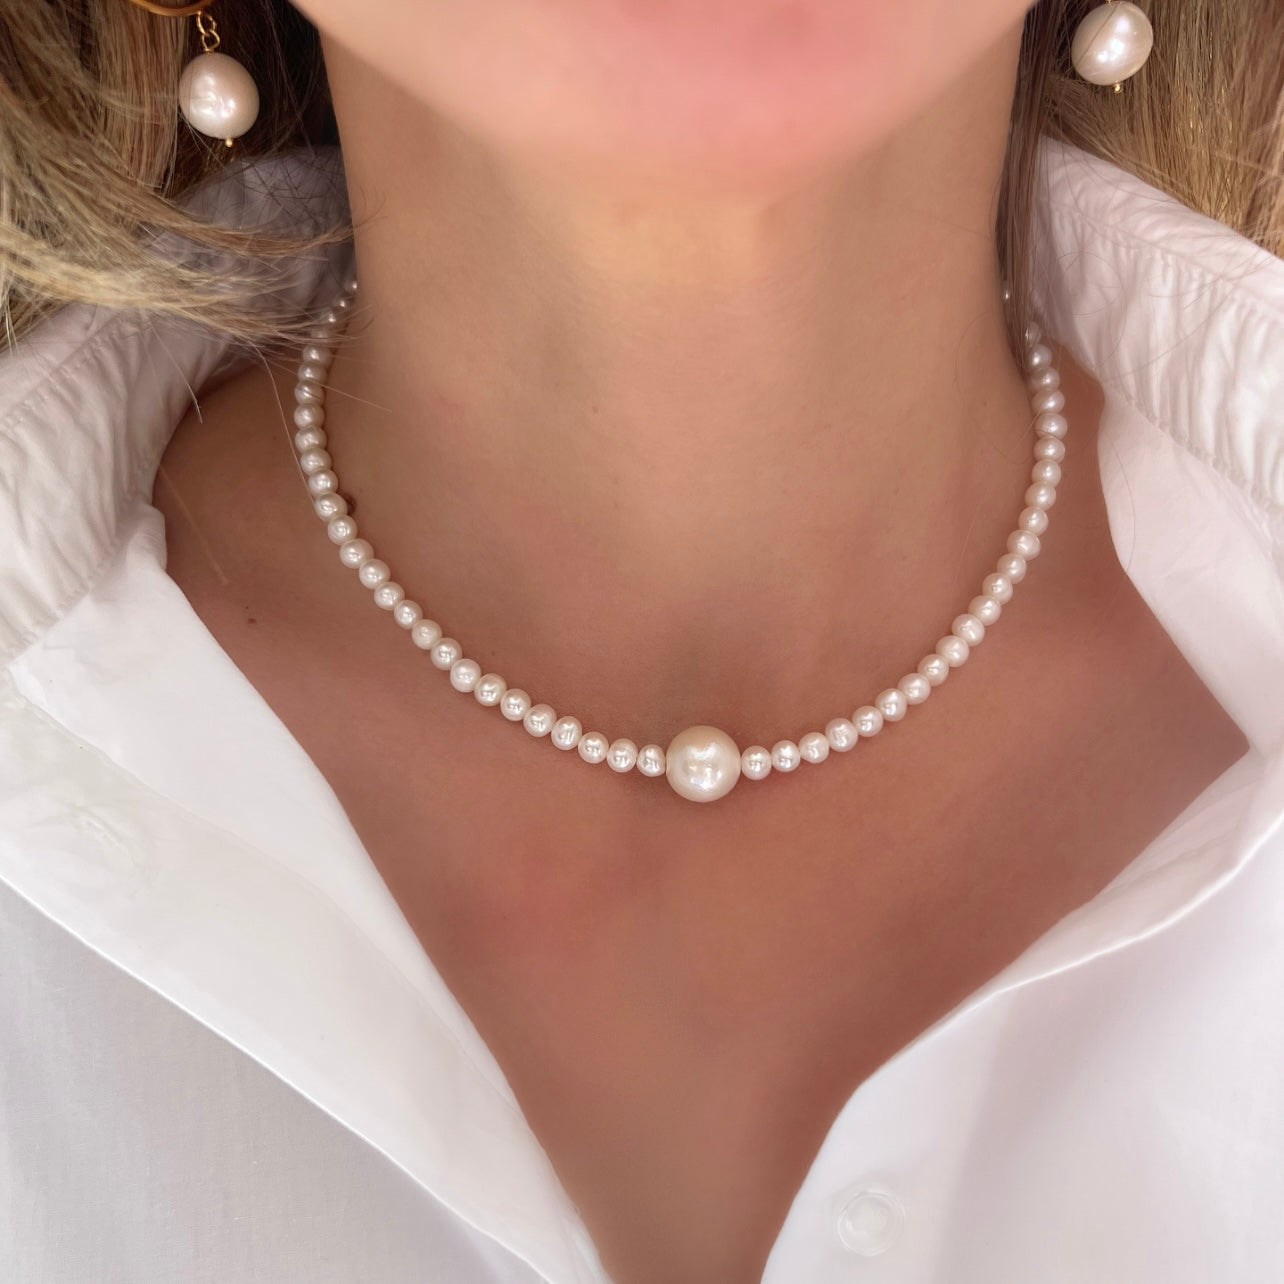 White Pearls Necklace